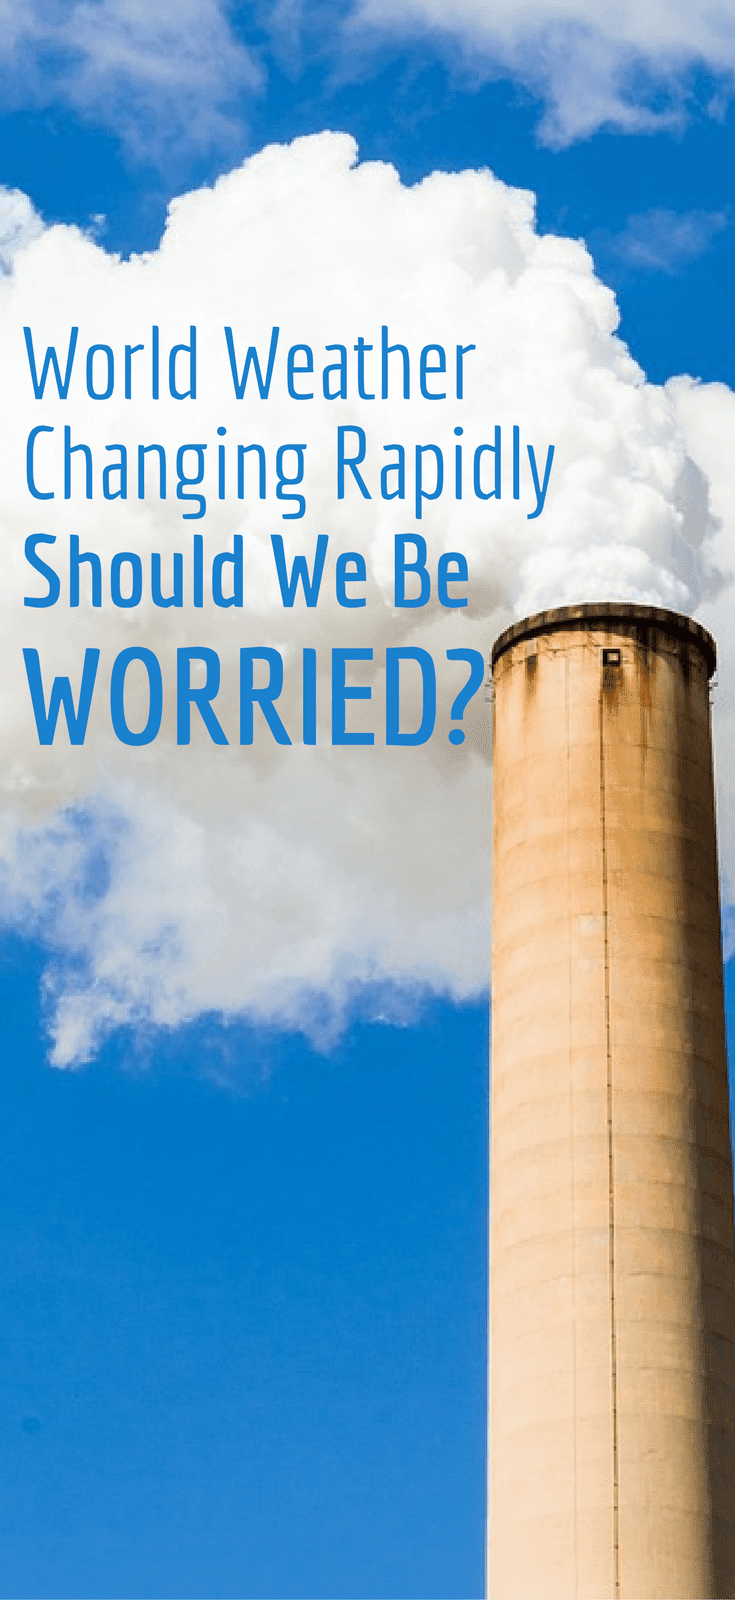 World Weather Changing Rapidly: Should We Be Worried?